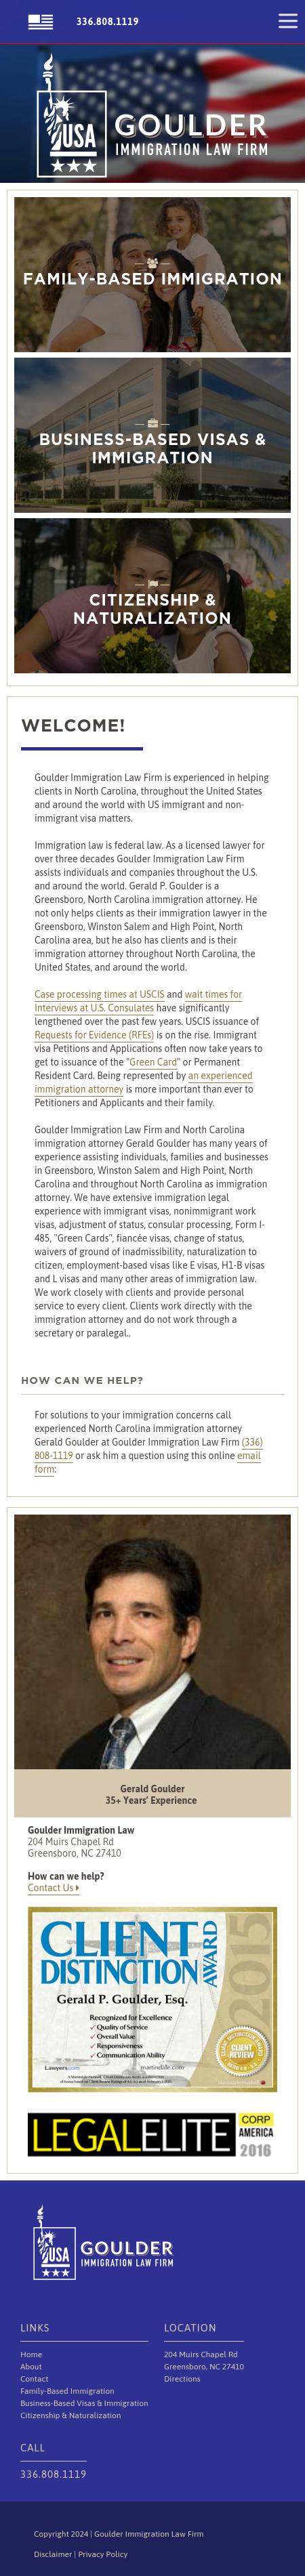 Goulder Immigration Law Firm - Greensboro NC Lawyers